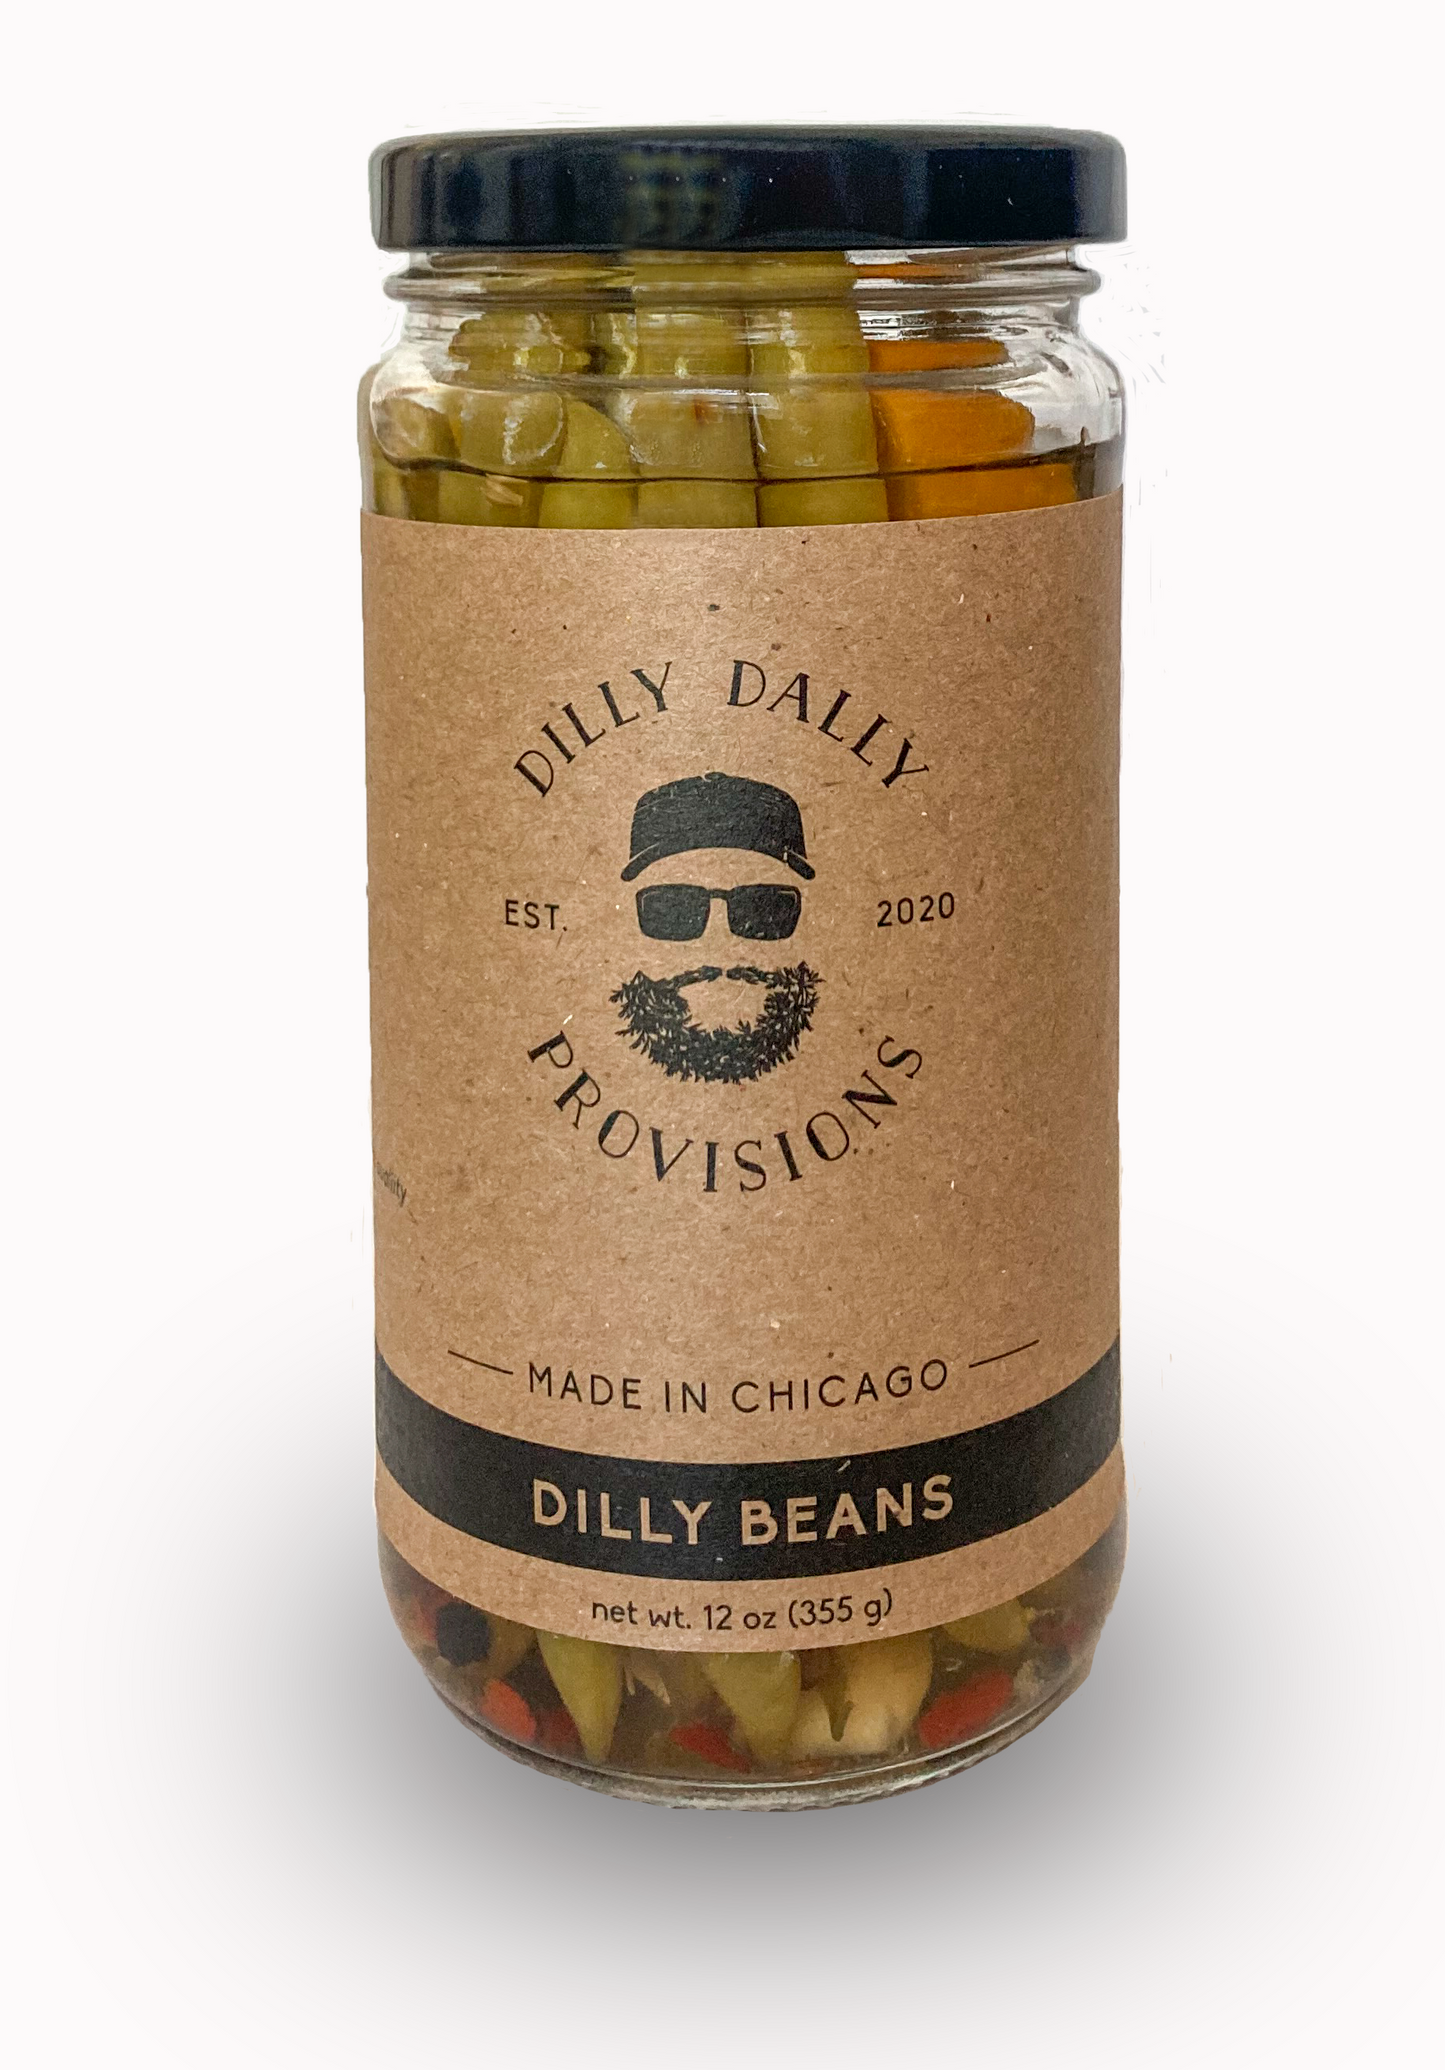 Dilly Dally Provisions Dilly Beans